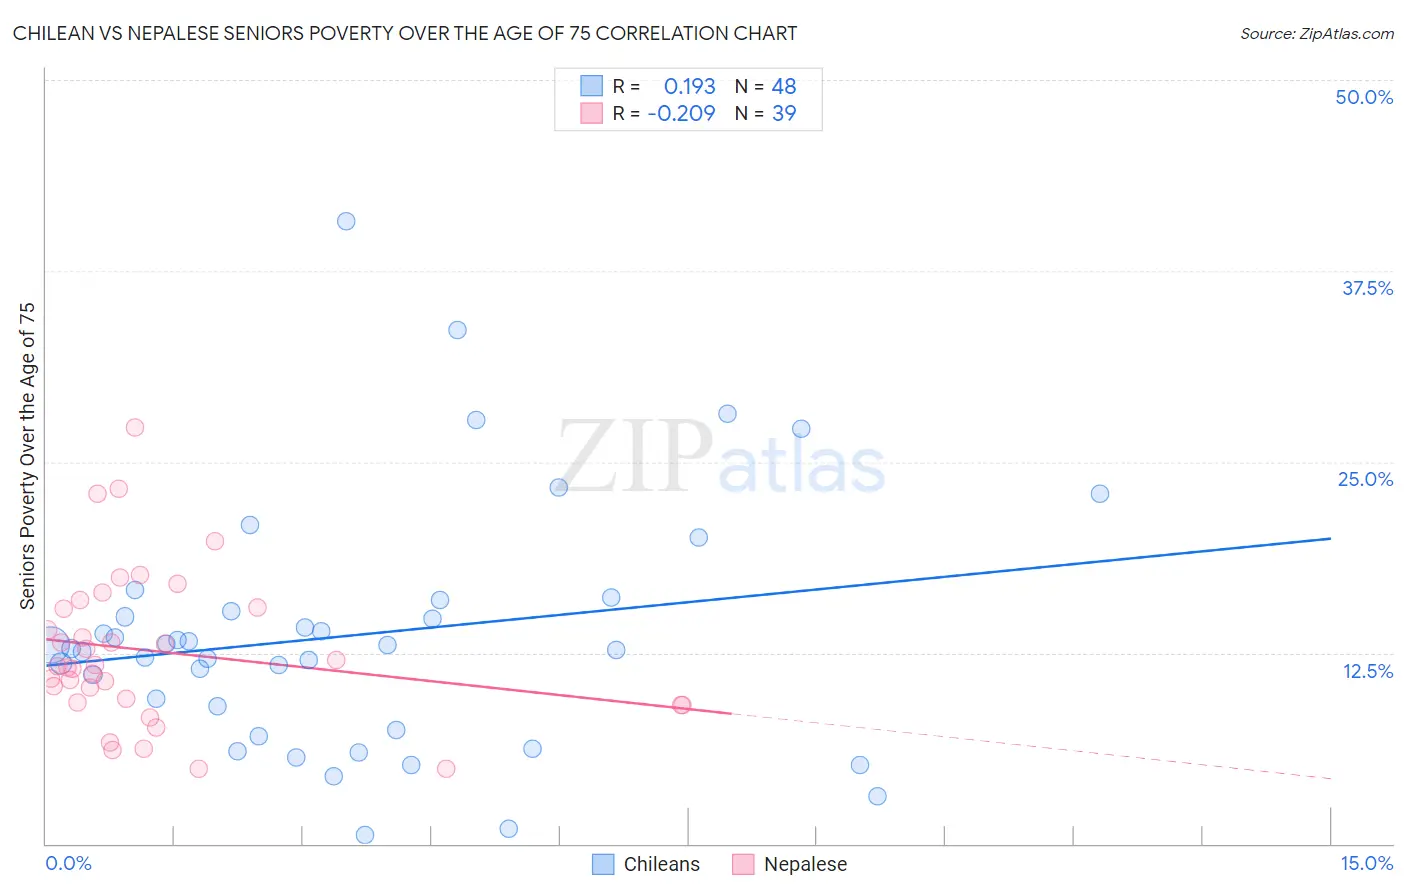 Chilean vs Nepalese Seniors Poverty Over the Age of 75